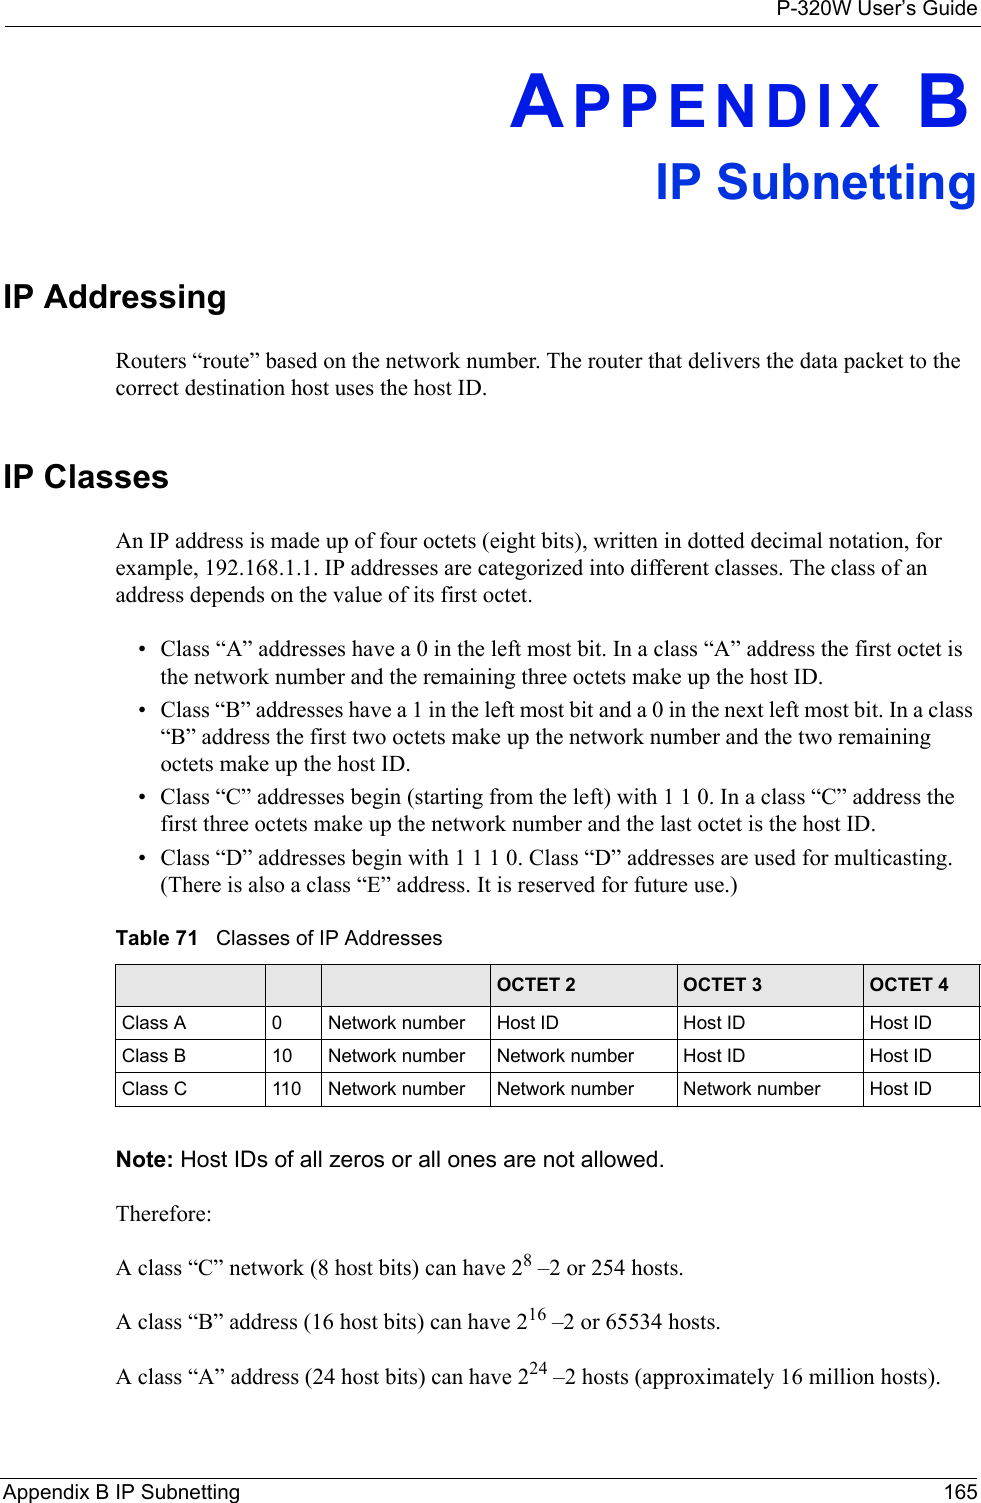 P-320W User’s GuideAppendix B IP Subnetting 165APPENDIX BIP SubnettingIP Addressing Routers “route” based on the network number. The router that delivers the data packet to the correct destination host uses the host ID. IP ClassesAn IP address is made up of four octets (eight bits), written in dotted decimal notation, for example, 192.168.1.1. IP addresses are categorized into different classes. The class of an address depends on the value of its first octet. • Class “A” addresses have a 0 in the left most bit. In a class “A” address the first octet is the network number and the remaining three octets make up the host ID.• Class “B” addresses have a 1 in the left most bit and a 0 in the next left most bit. In a class “B” address the first two octets make up the network number and the two remaining octets make up the host ID.• Class “C” addresses begin (starting from the left) with 1 1 0. In a class “C” address the first three octets make up the network number and the last octet is the host ID.• Class “D” addresses begin with 1 1 1 0. Class “D” addresses are used for multicasting. (There is also a class “E” address. It is reserved for future use.) Table 71   Classes of IP Addresses IP ADDRESS: OCTET 1 OCTET 2 OCTET 3 OCTET 4Class A 0Network number Host ID Host ID Host IDClass B 10 Network number Network number Host ID Host IDClass C 110 Network number Network number Network number Host IDNote: Host IDs of all zeros or all ones are not allowed.Therefore:A class “C” network (8 host bits) can have 28 –2 or 254 hosts. A class “B” address (16 host bits) can have 216 –2 or 65534 hosts. A class “A” address (24 host bits) can have 224 –2 hosts (approximately 16 million hosts). 